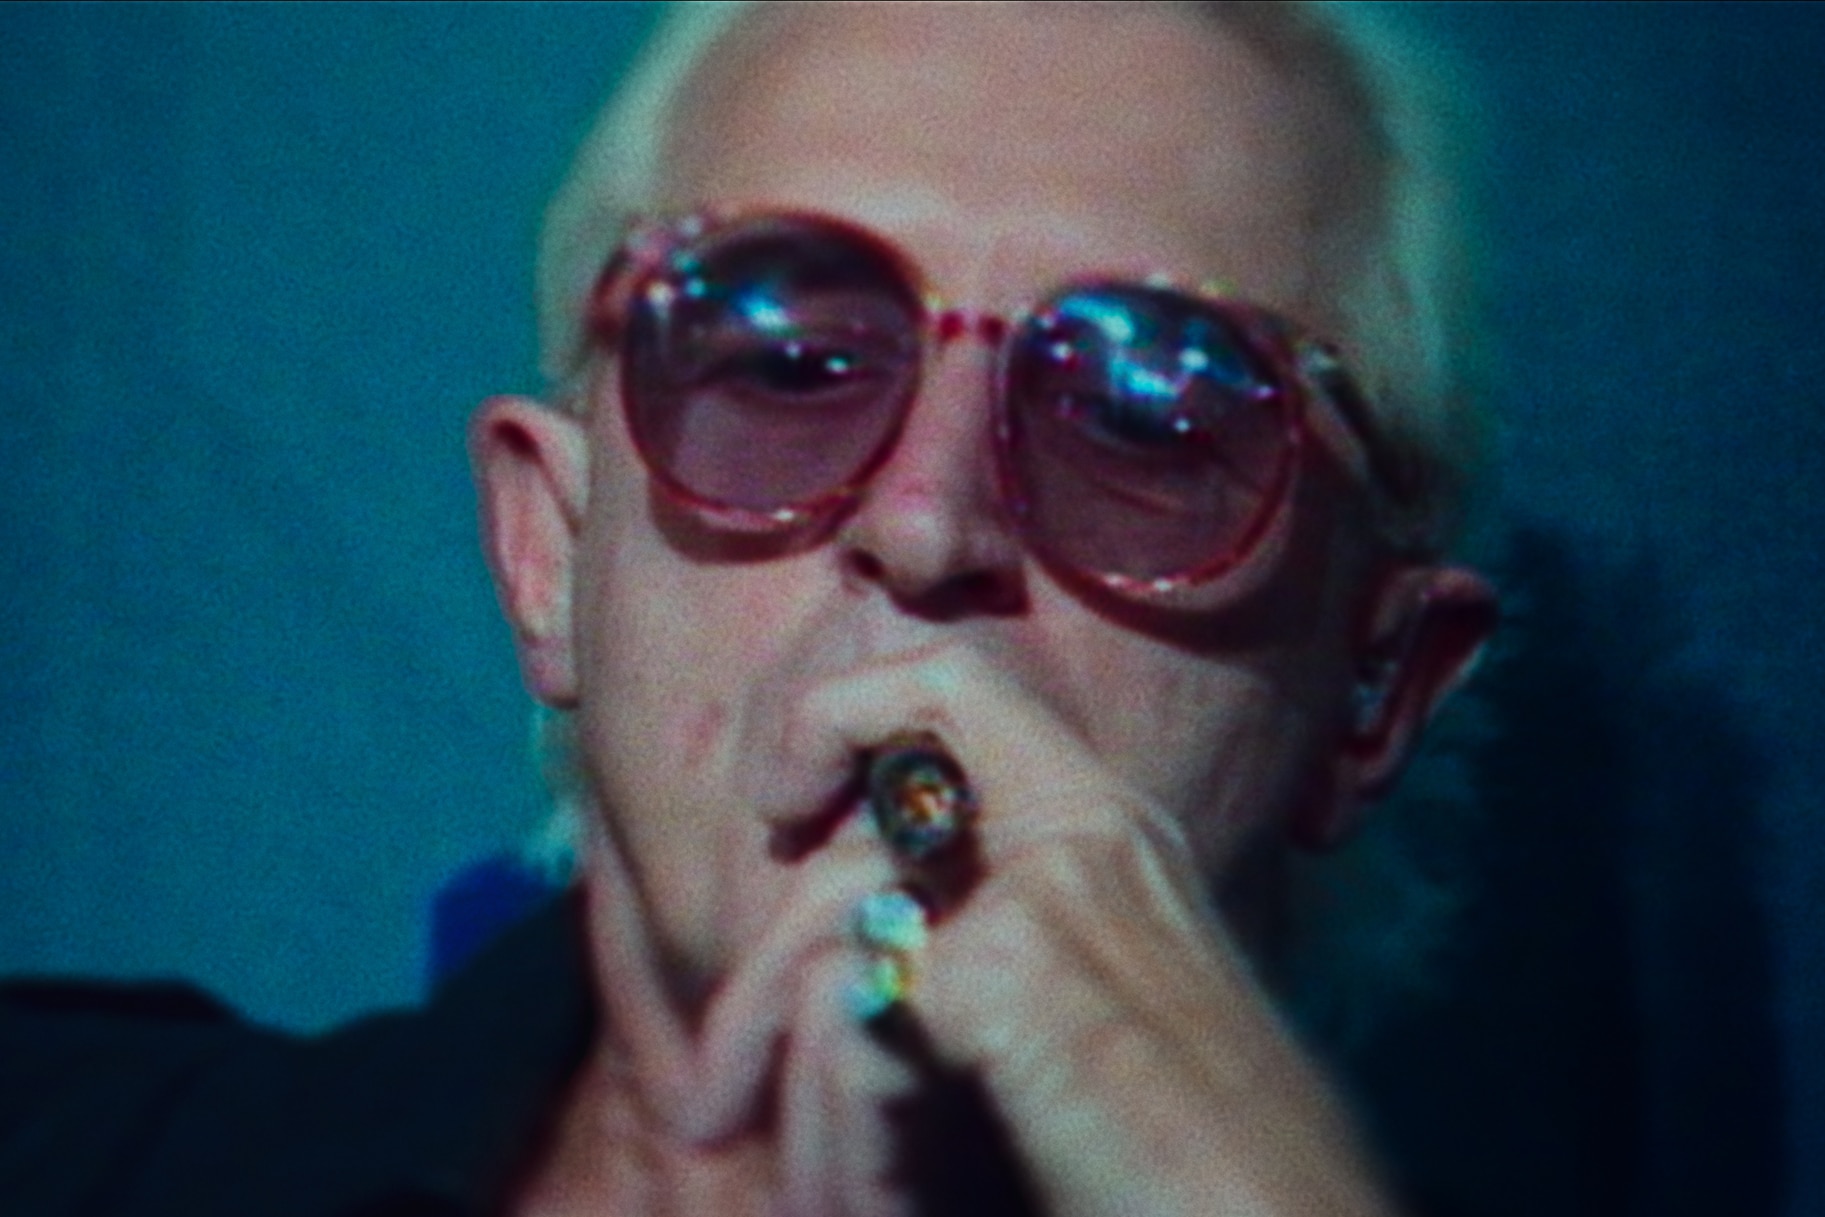 Footage of Jimmy Savile in Jimmy Savile: A British Horror Story Part 1.